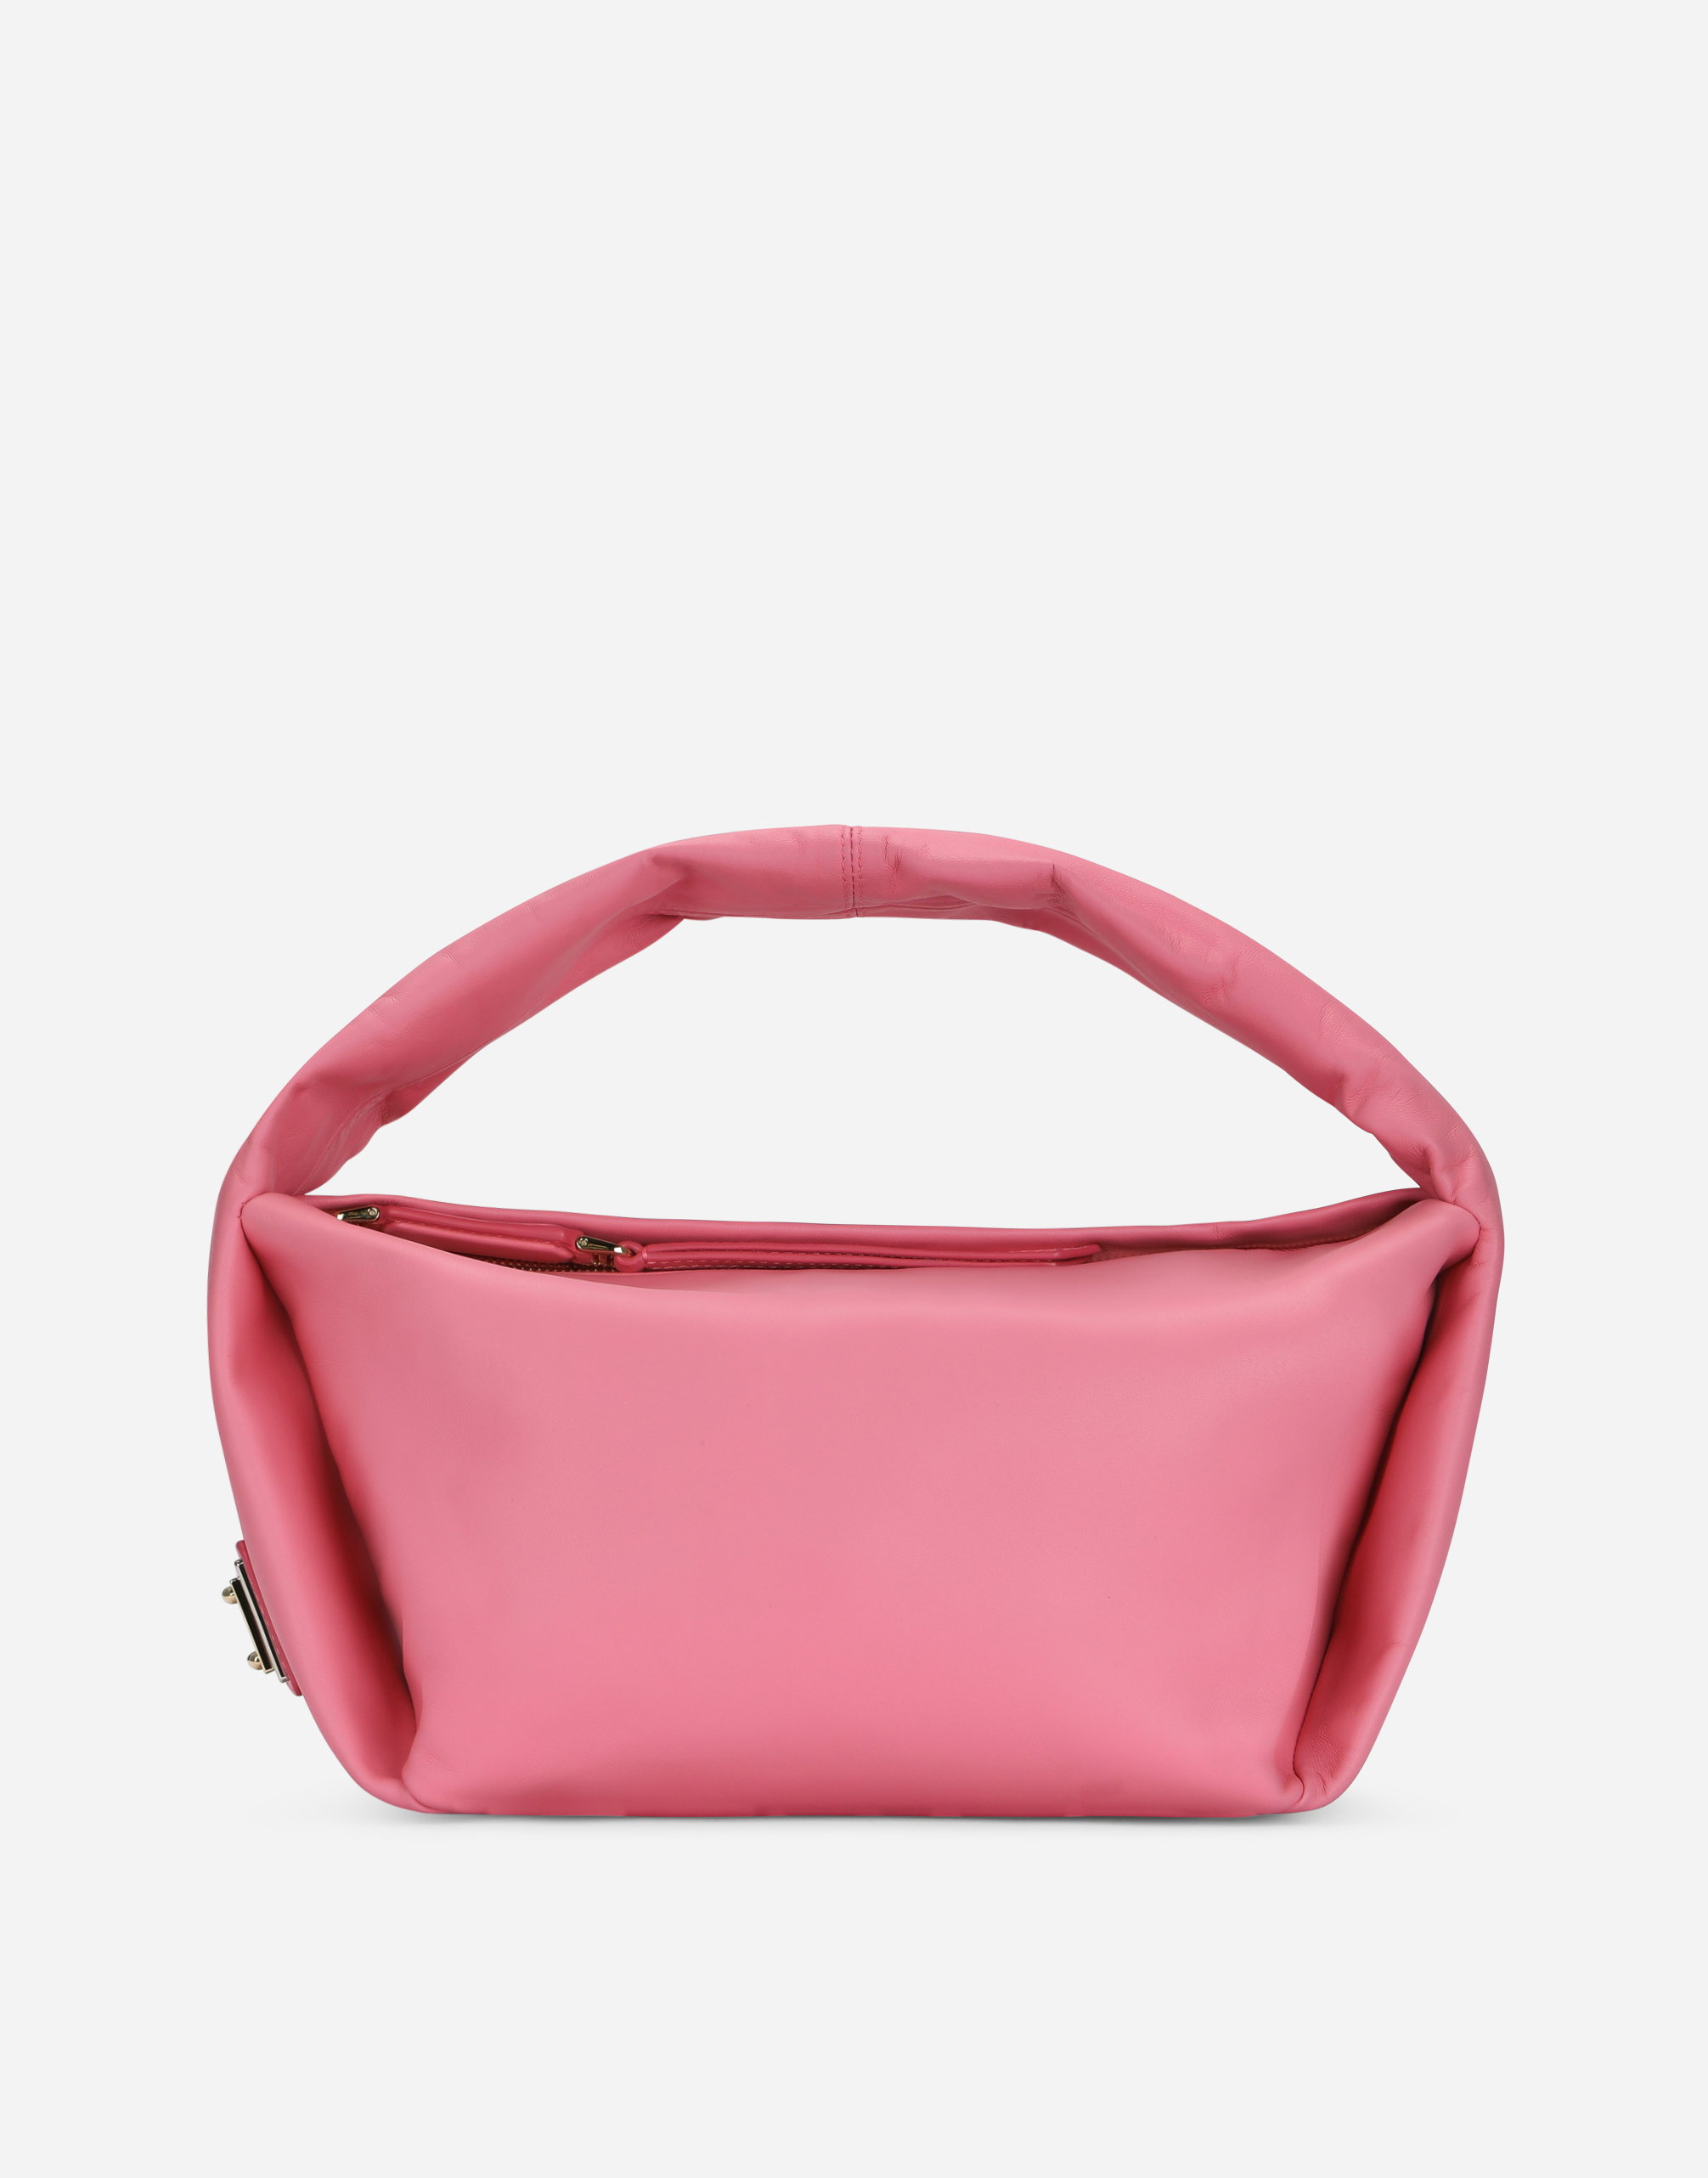 BORSA A MANO in Pink